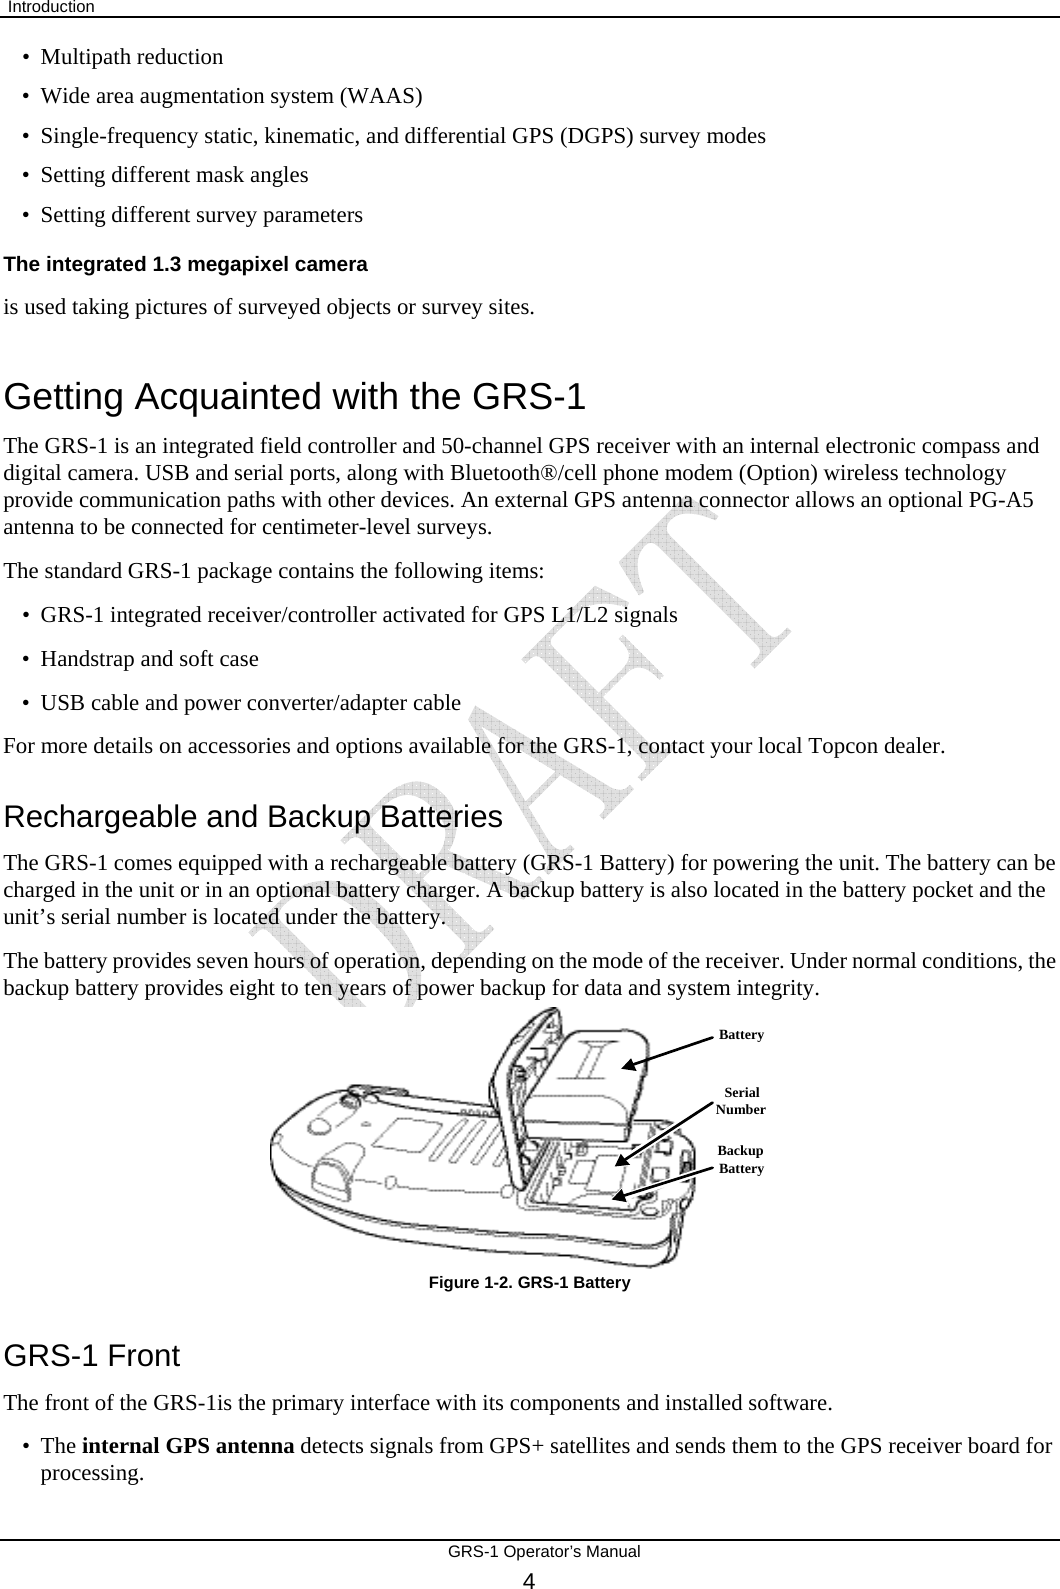  Introduction       GRS-1 Operator’s Manual 4 BackupBatteryBatterySerialNumber• Multipath reduction • Wide area augmentation system (WAAS) • Single-frequency static, kinematic, and differential GPS (DGPS) survey modes • Setting different mask angles • Setting different survey parameters The integrated 1.3 megapixel camera is used taking pictures of surveyed objects or survey sites. Getting Acquainted with the GRS-1 The GRS-1 is an integrated field controller and 50-channel GPS receiver with an internal electronic compass and digital camera. USB and serial ports, along with Bluetooth®/cell phone modem (Option) wireless technology provide communication paths with other devices. An external GPS antenna connector allows an optional PG-A5 antenna to be connected for centimeter-level surveys. The standard GRS-1 package contains the following items: • GRS-1 integrated receiver/controller activated for GPS L1/L2 signals • Handstrap and soft case • USB cable and power converter/adapter cable For more details on accessories and options available for the GRS-1, contact your local Topcon dealer. Rechargeable and Backup Batteries The GRS-1 comes equipped with a rechargeable battery (GRS-1 Battery) for powering the unit. The battery can be charged in the unit or in an optional battery charger. A backup battery is also located in the battery pocket and the unit’s serial number is located under the battery. The battery provides seven hours of operation, depending on the mode of the receiver. Under normal conditions, the backup battery provides eight to ten years of power backup for data and system integrity.        Figure 1-2. GRS-1 Battery GRS-1 Front The front of the GRS-1is the primary interface with its components and installed software. • The internal GPS antenna detects signals from GPS+ satellites and sends them to the GPS receiver board for processing. 